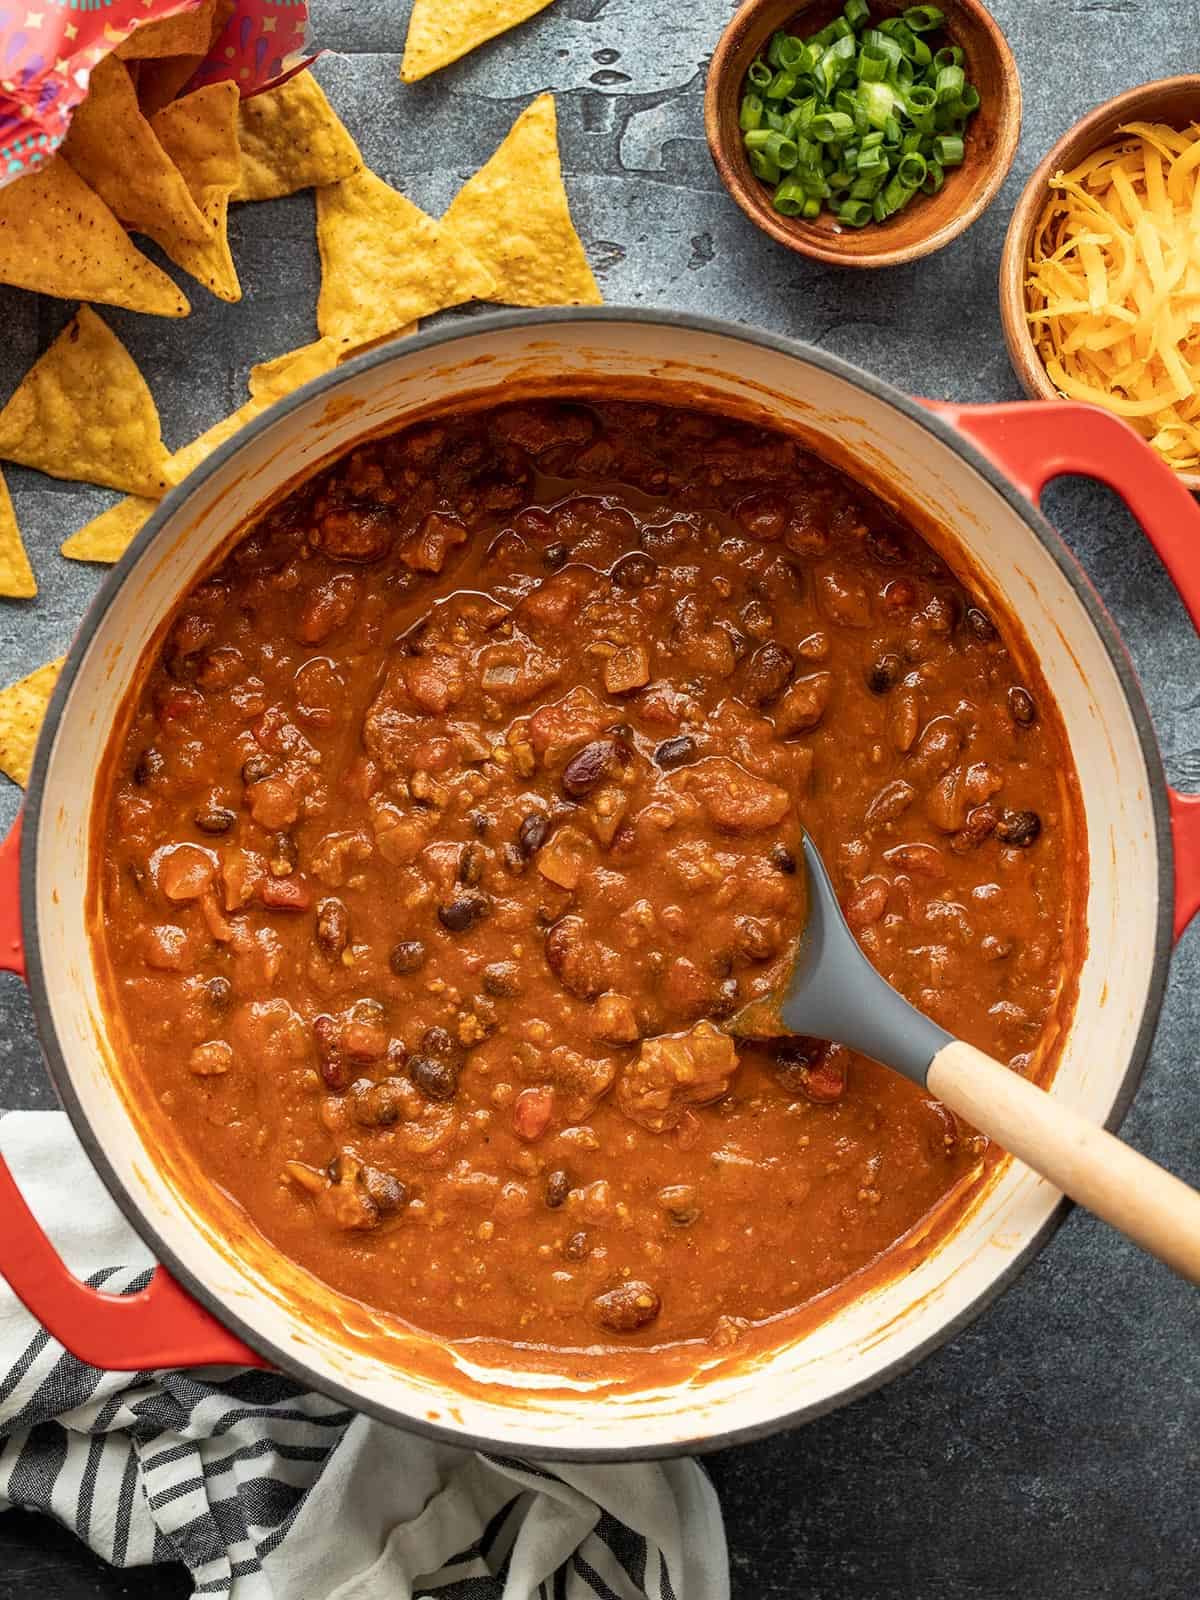 Overhead view of a pot of pumpkin chili with toppings on the sides